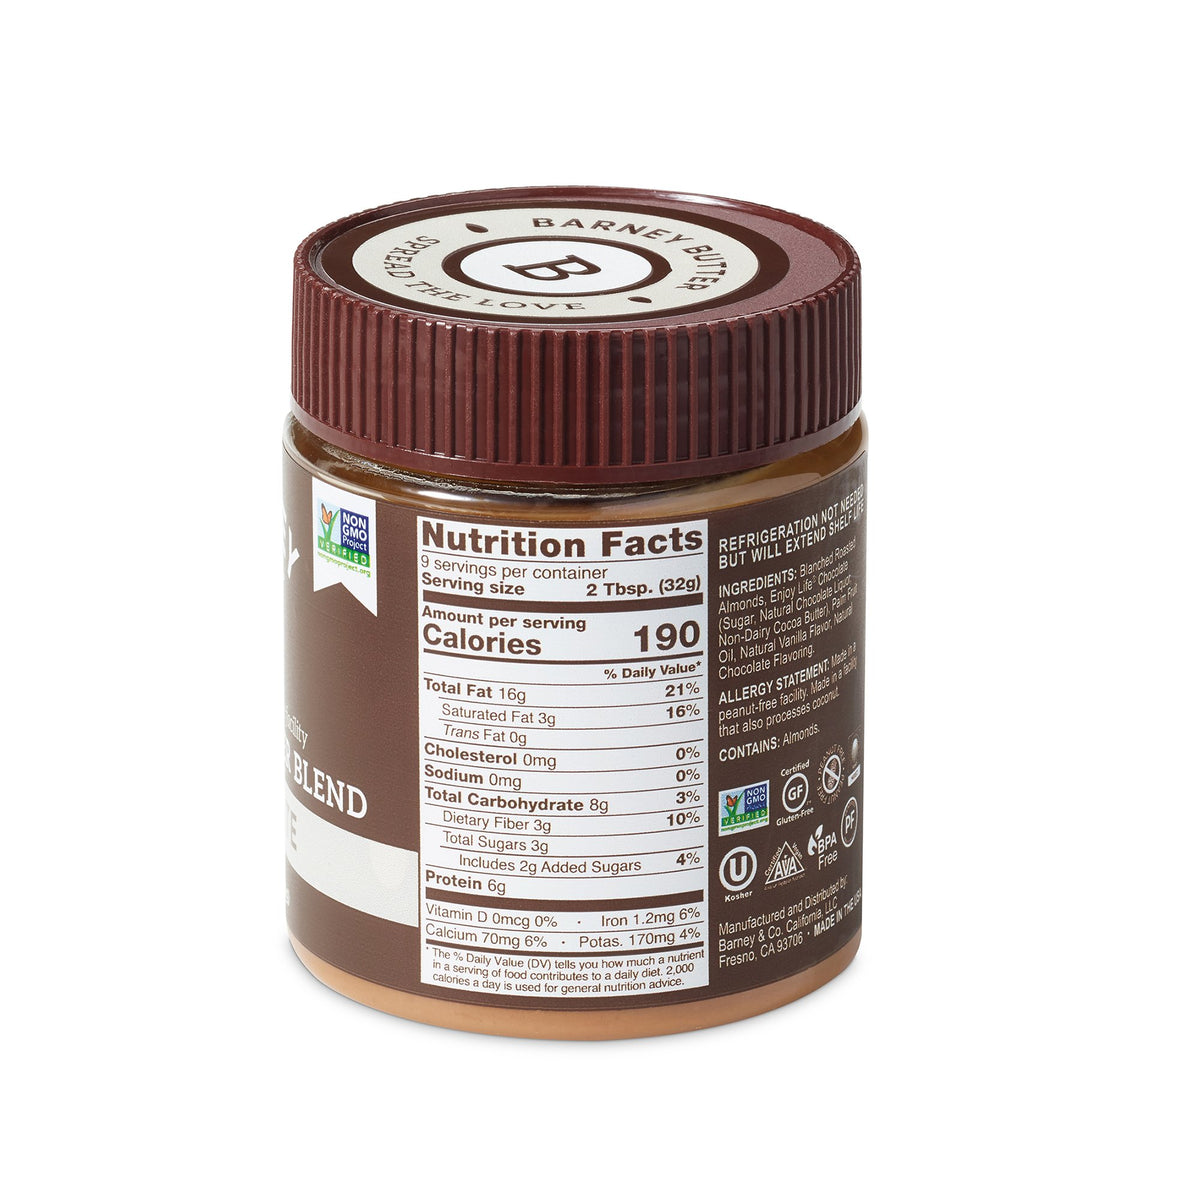 Chocolate Almond Butter Wholesale